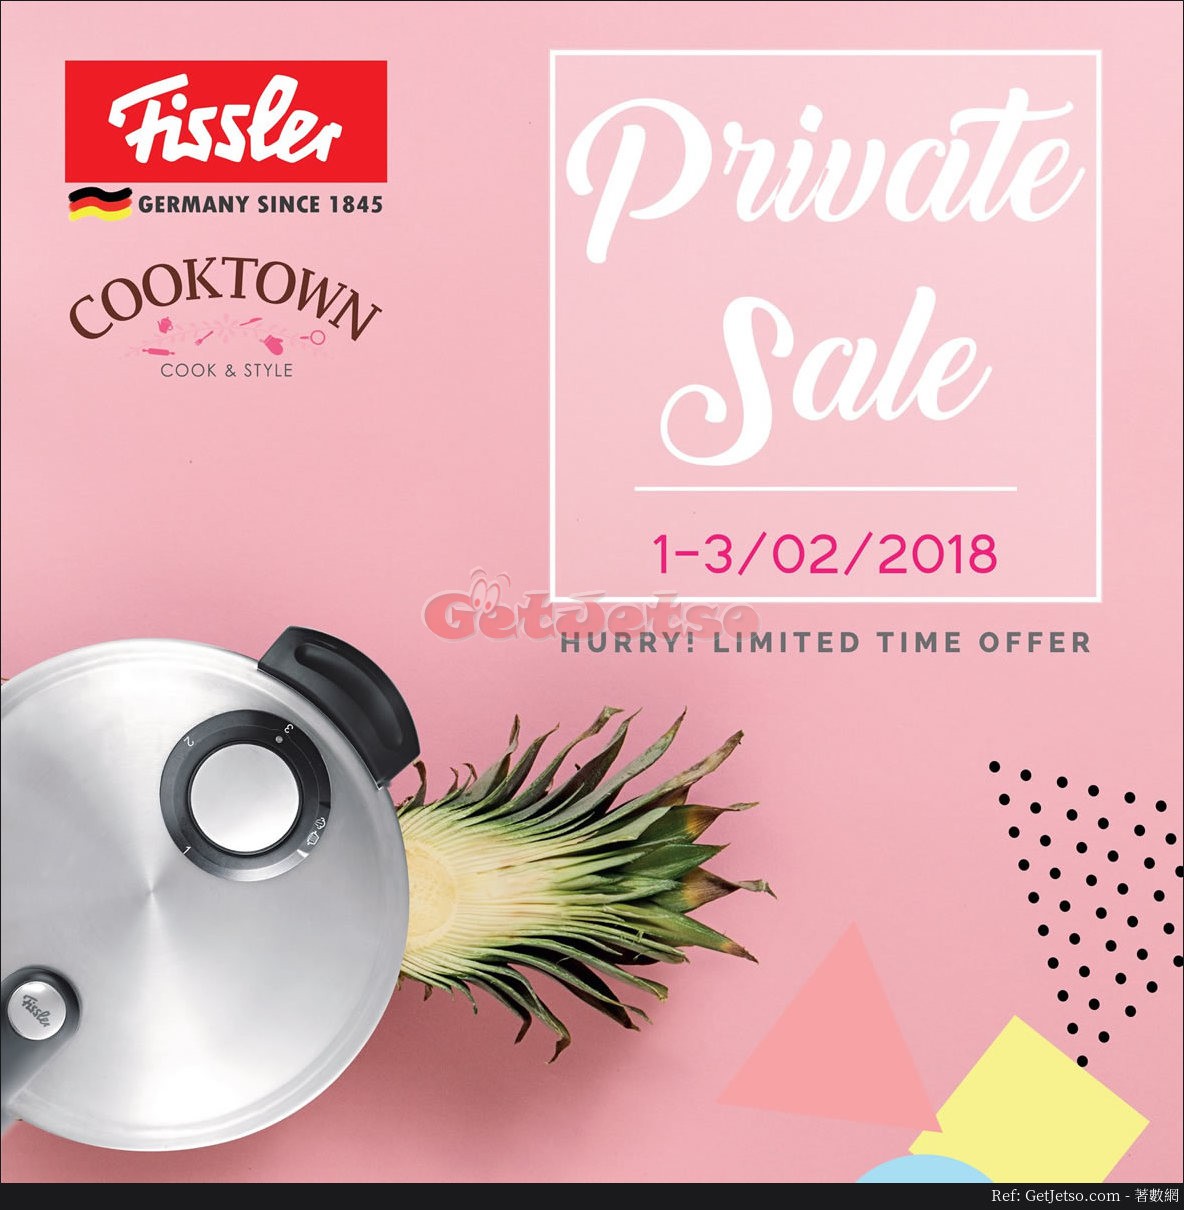 Fissler x Cook town 低至3折Private sale 優惠(18年2月1-3日)圖片1